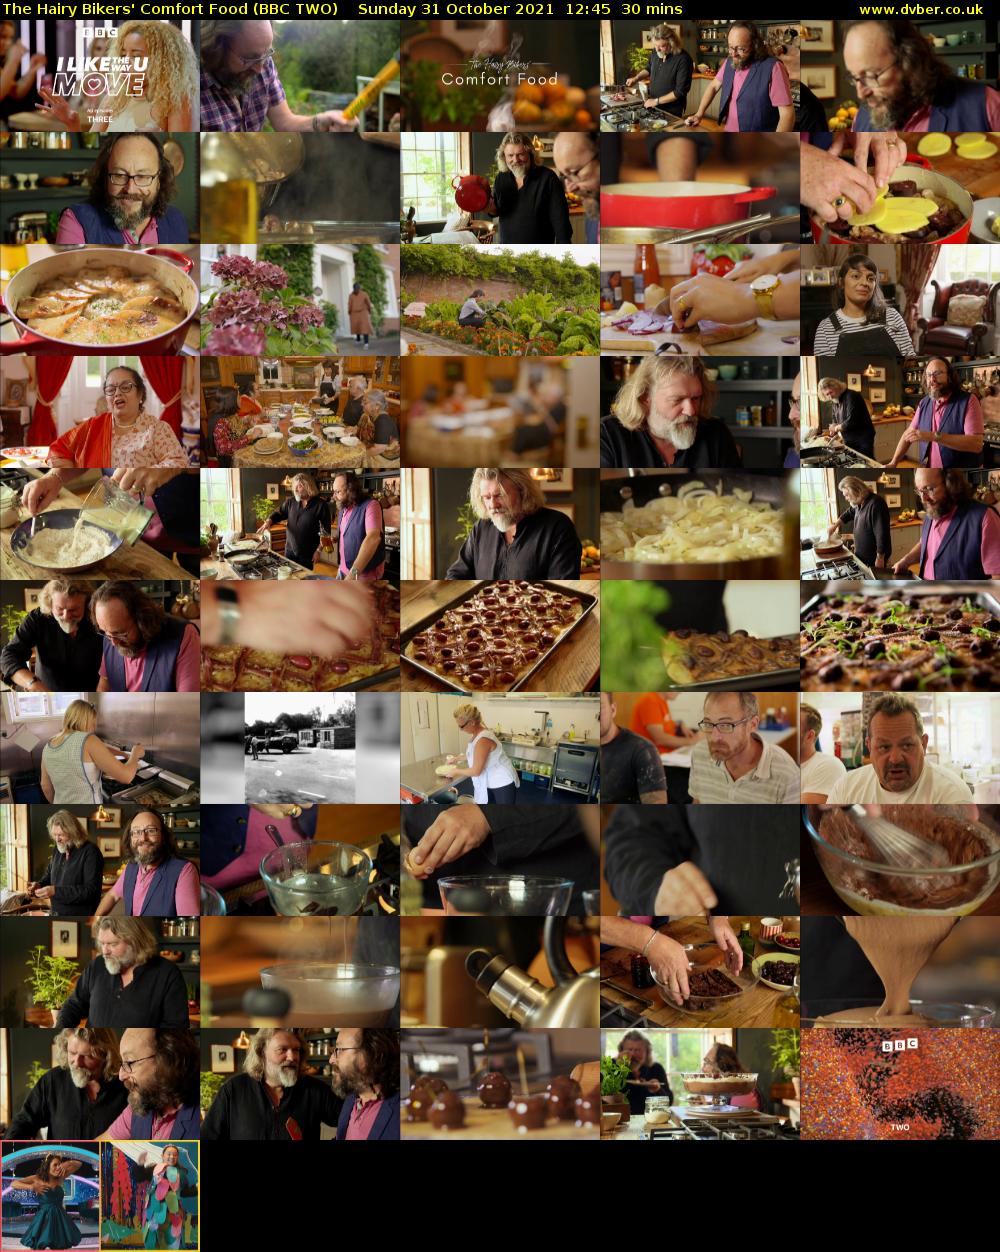 The Hairy Bikers' Comfort Food (BBC TWO) Sunday 31 October 2021 12:45 - 13:15